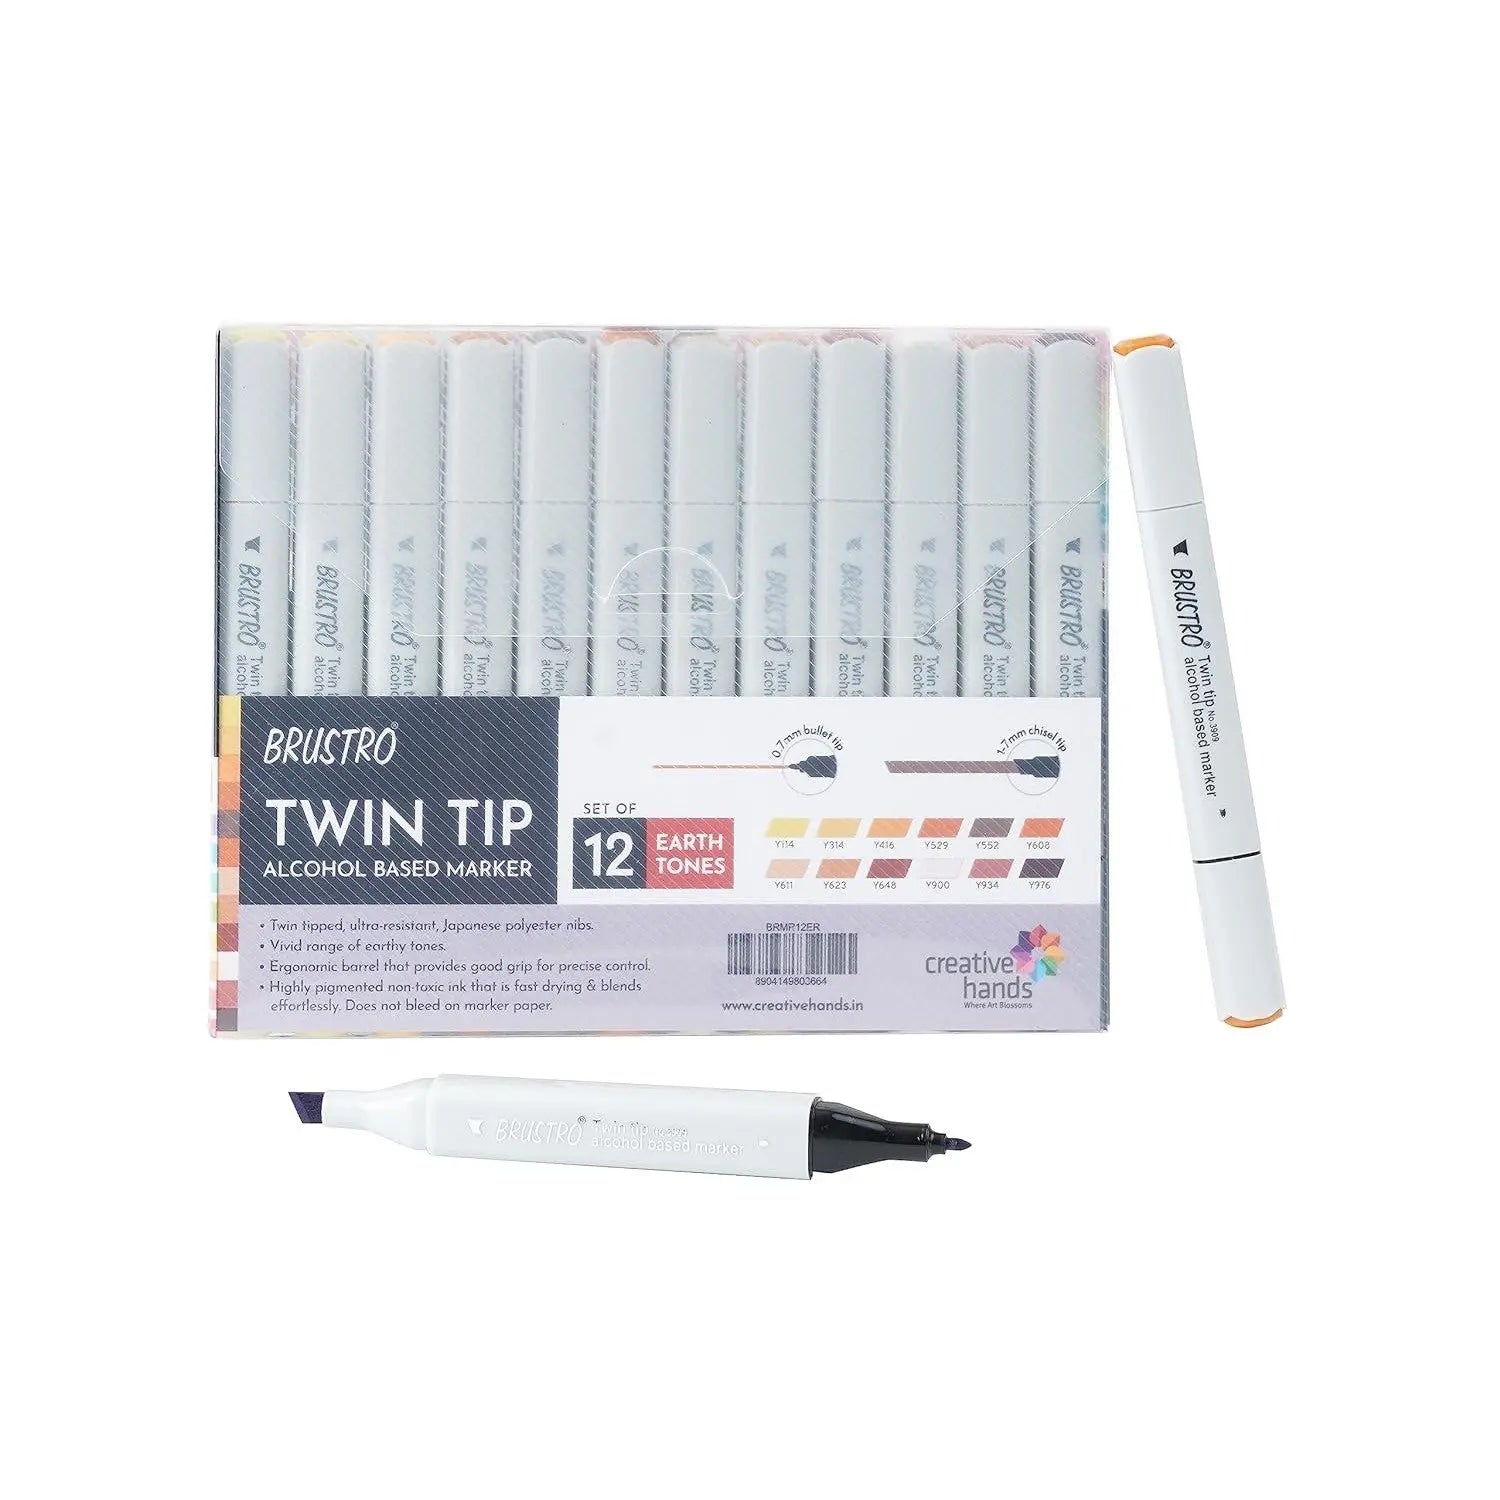 Brustro Twin Tip Alcohol Based Marker Set of 12 - Earth Tones Brustro